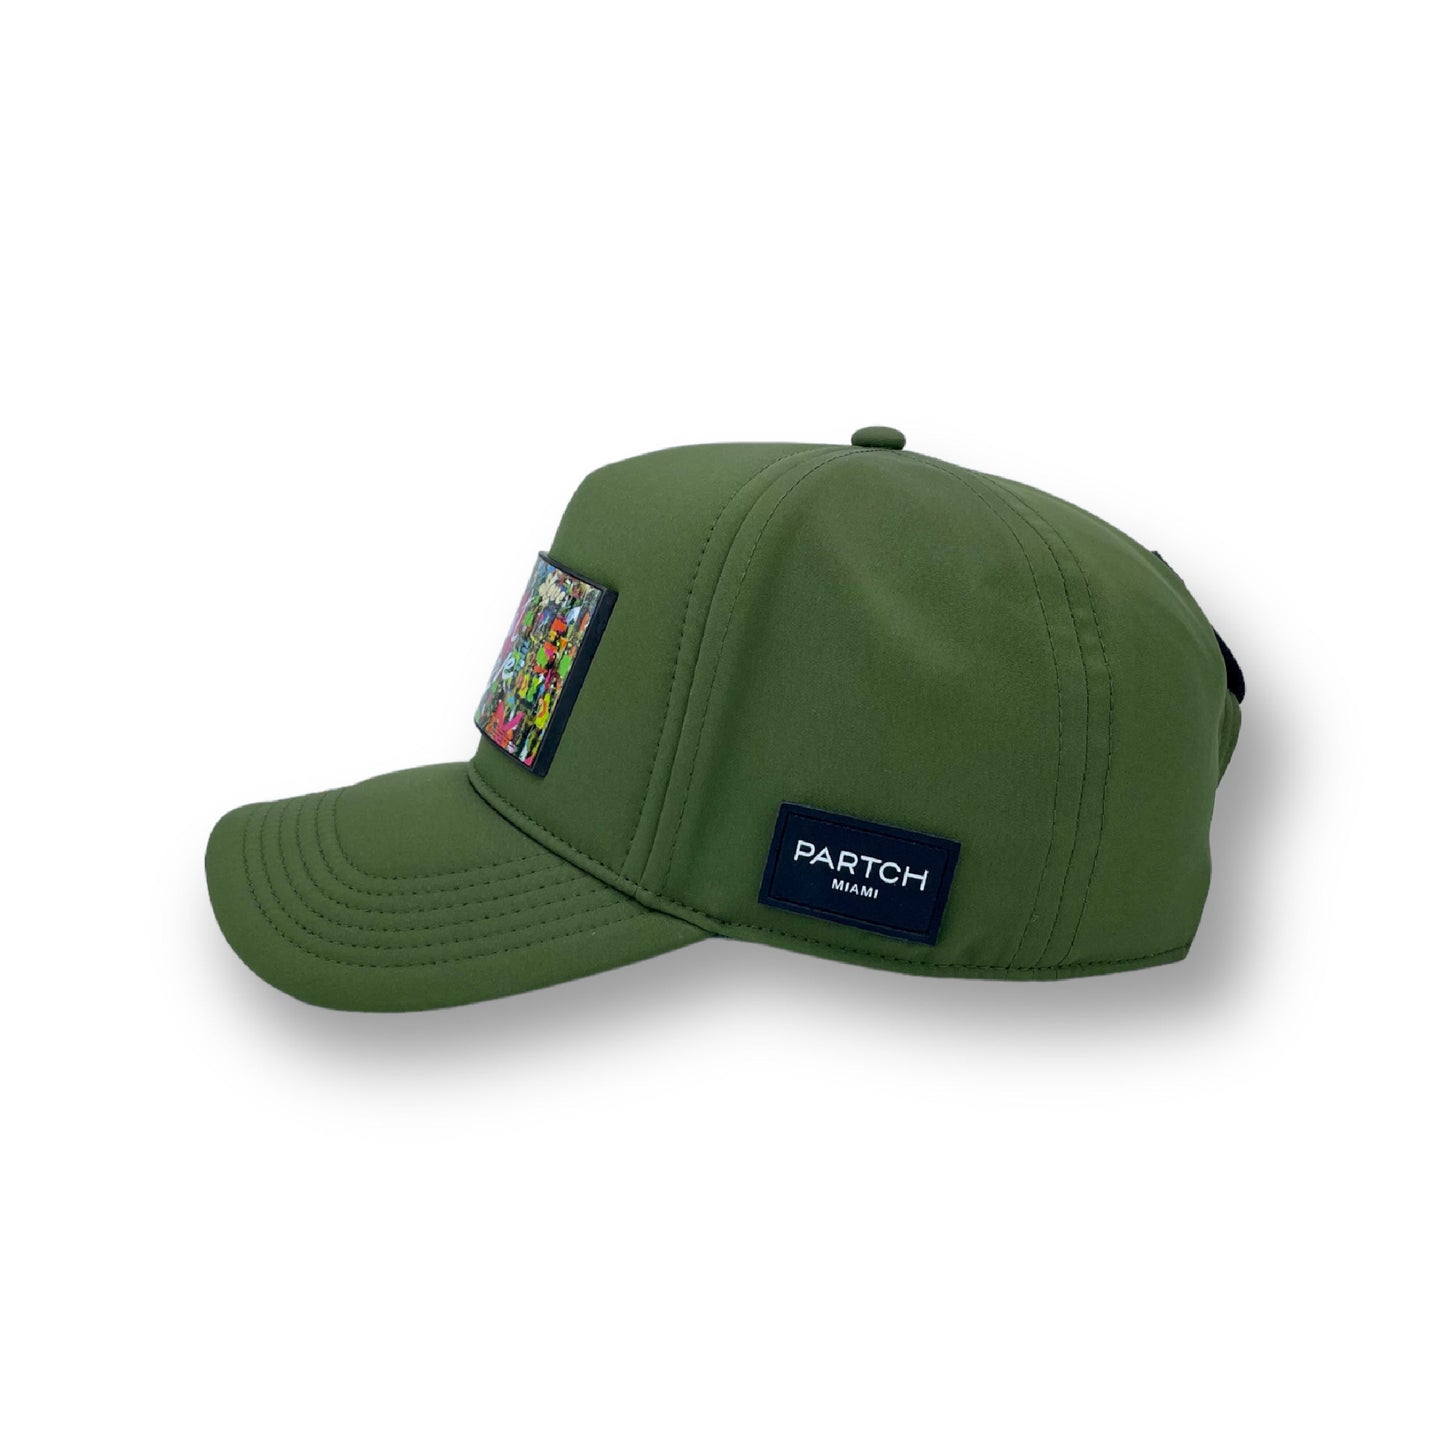 Partch Trucker hat green with Art removable PARTCH-Clip Do what you love